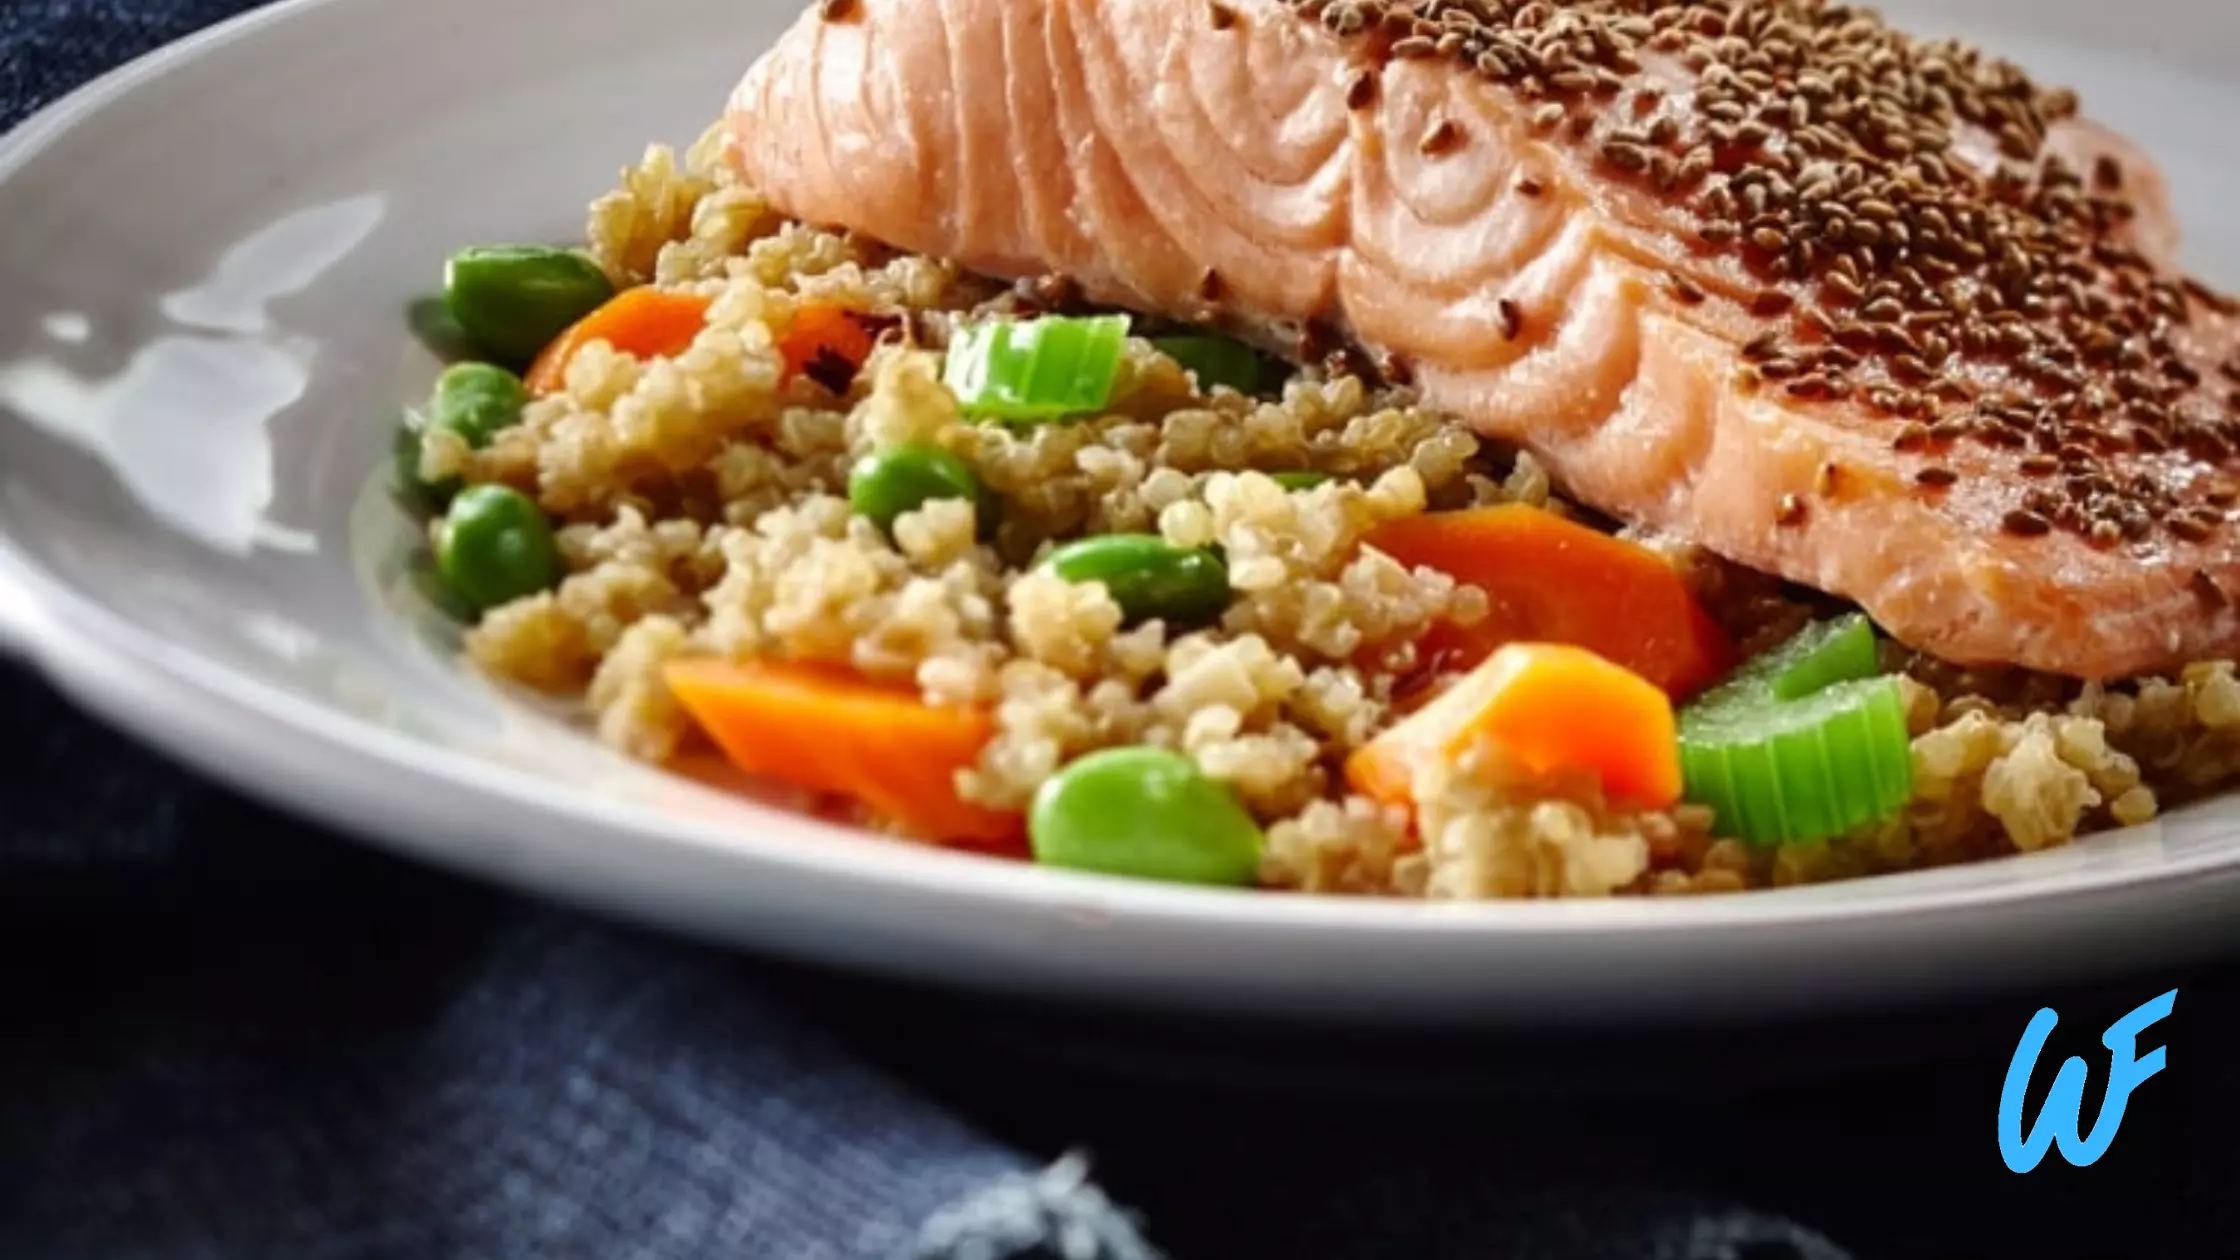 You are currently viewing Grilled Salmon with Quinoa and Steamed Vegetables Recipe